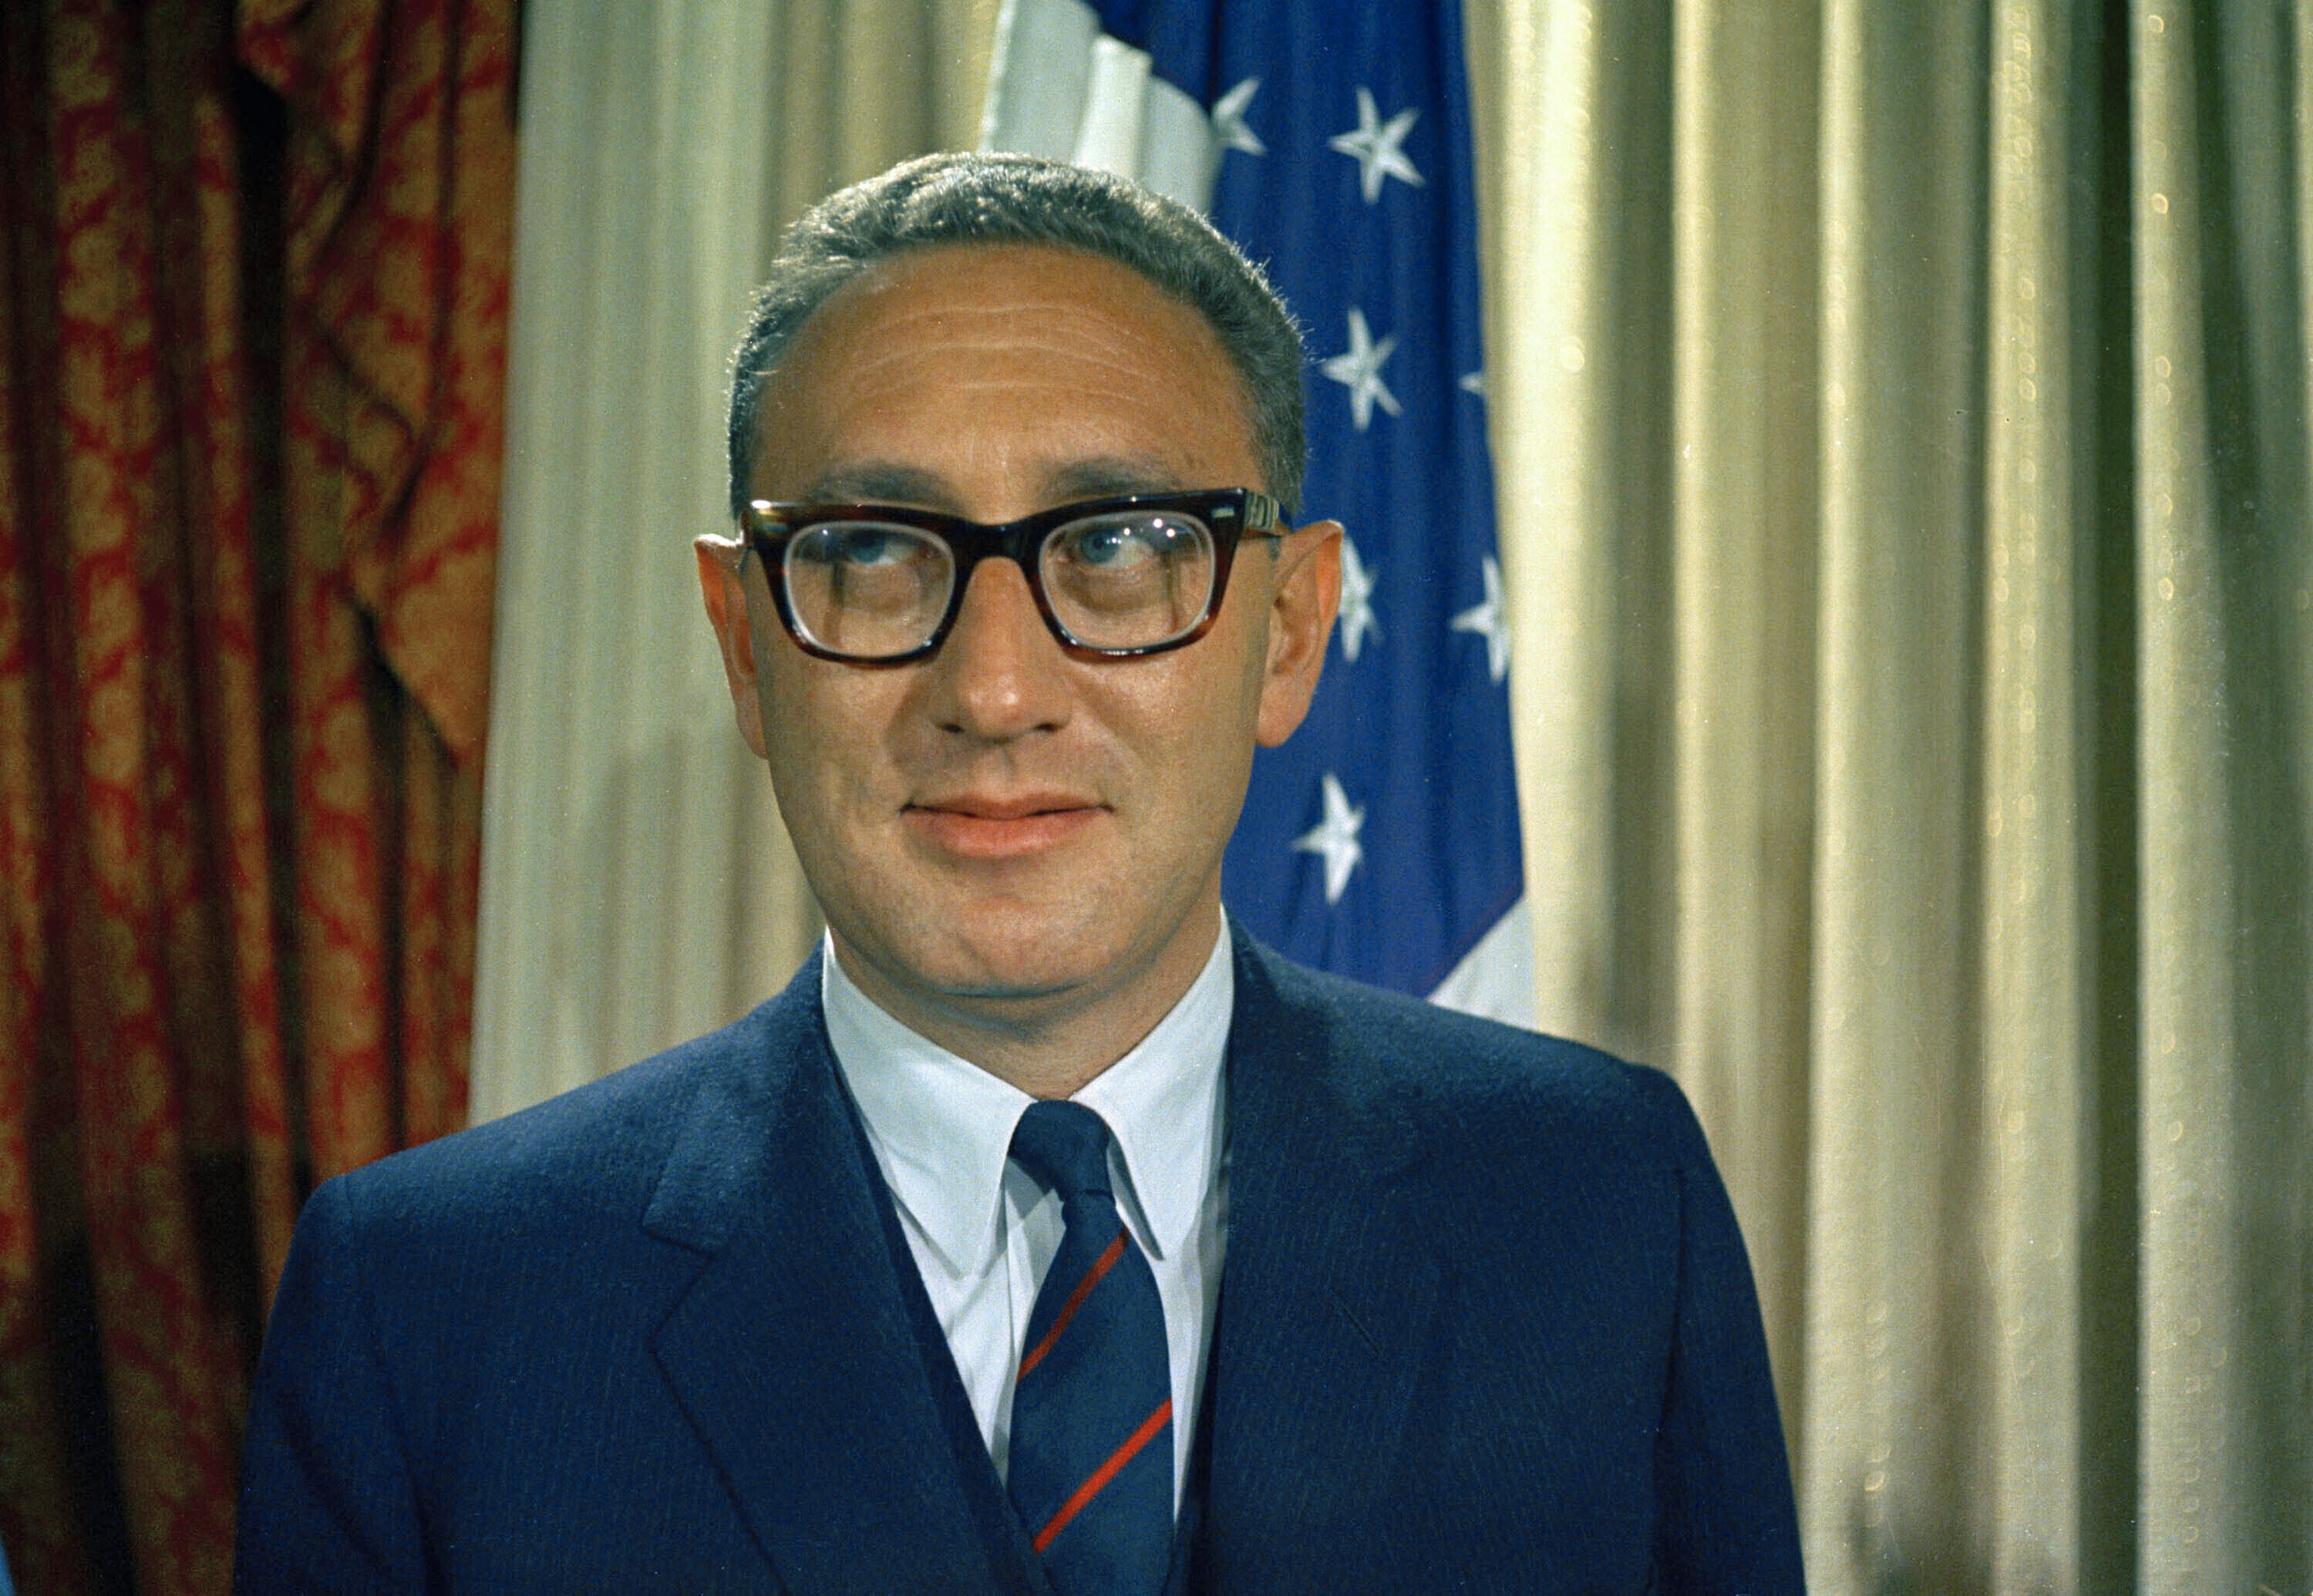 A Website Devoted to Updating if Henry Kissinger is Dead or Not